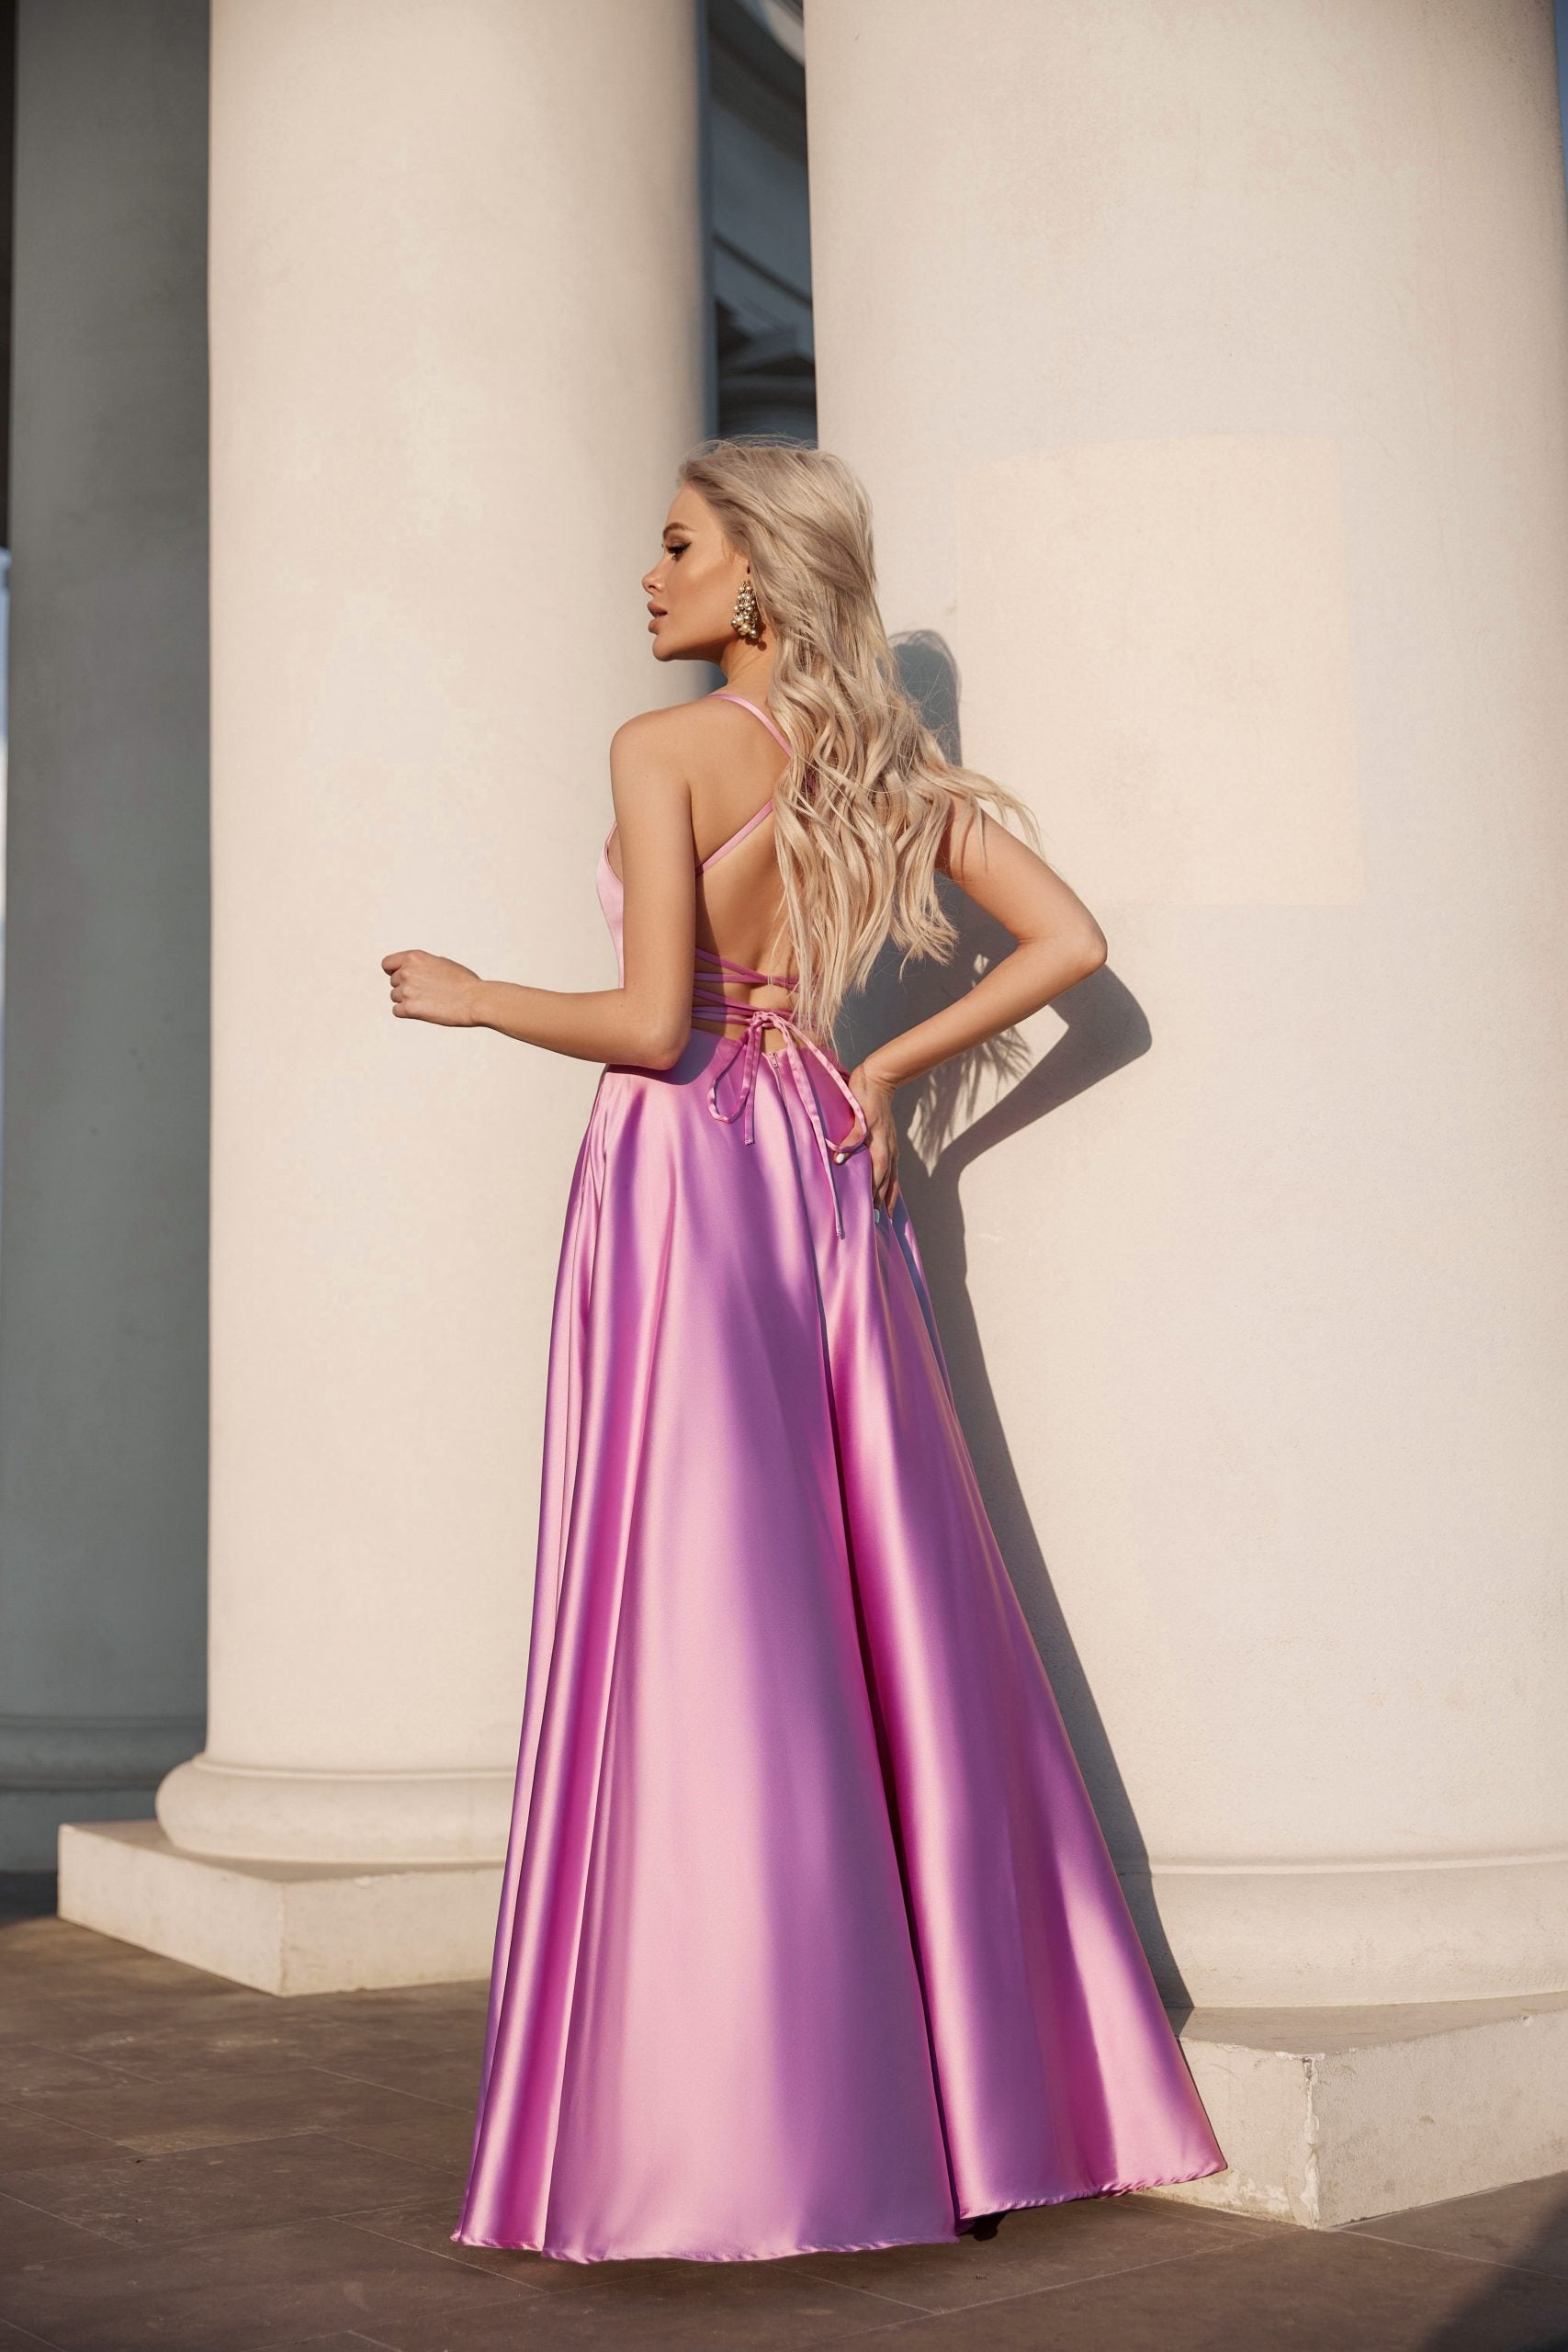 Tina Holly Couture Designer TW004 Orchid Lace Up Back Silky Satin Formal Gown